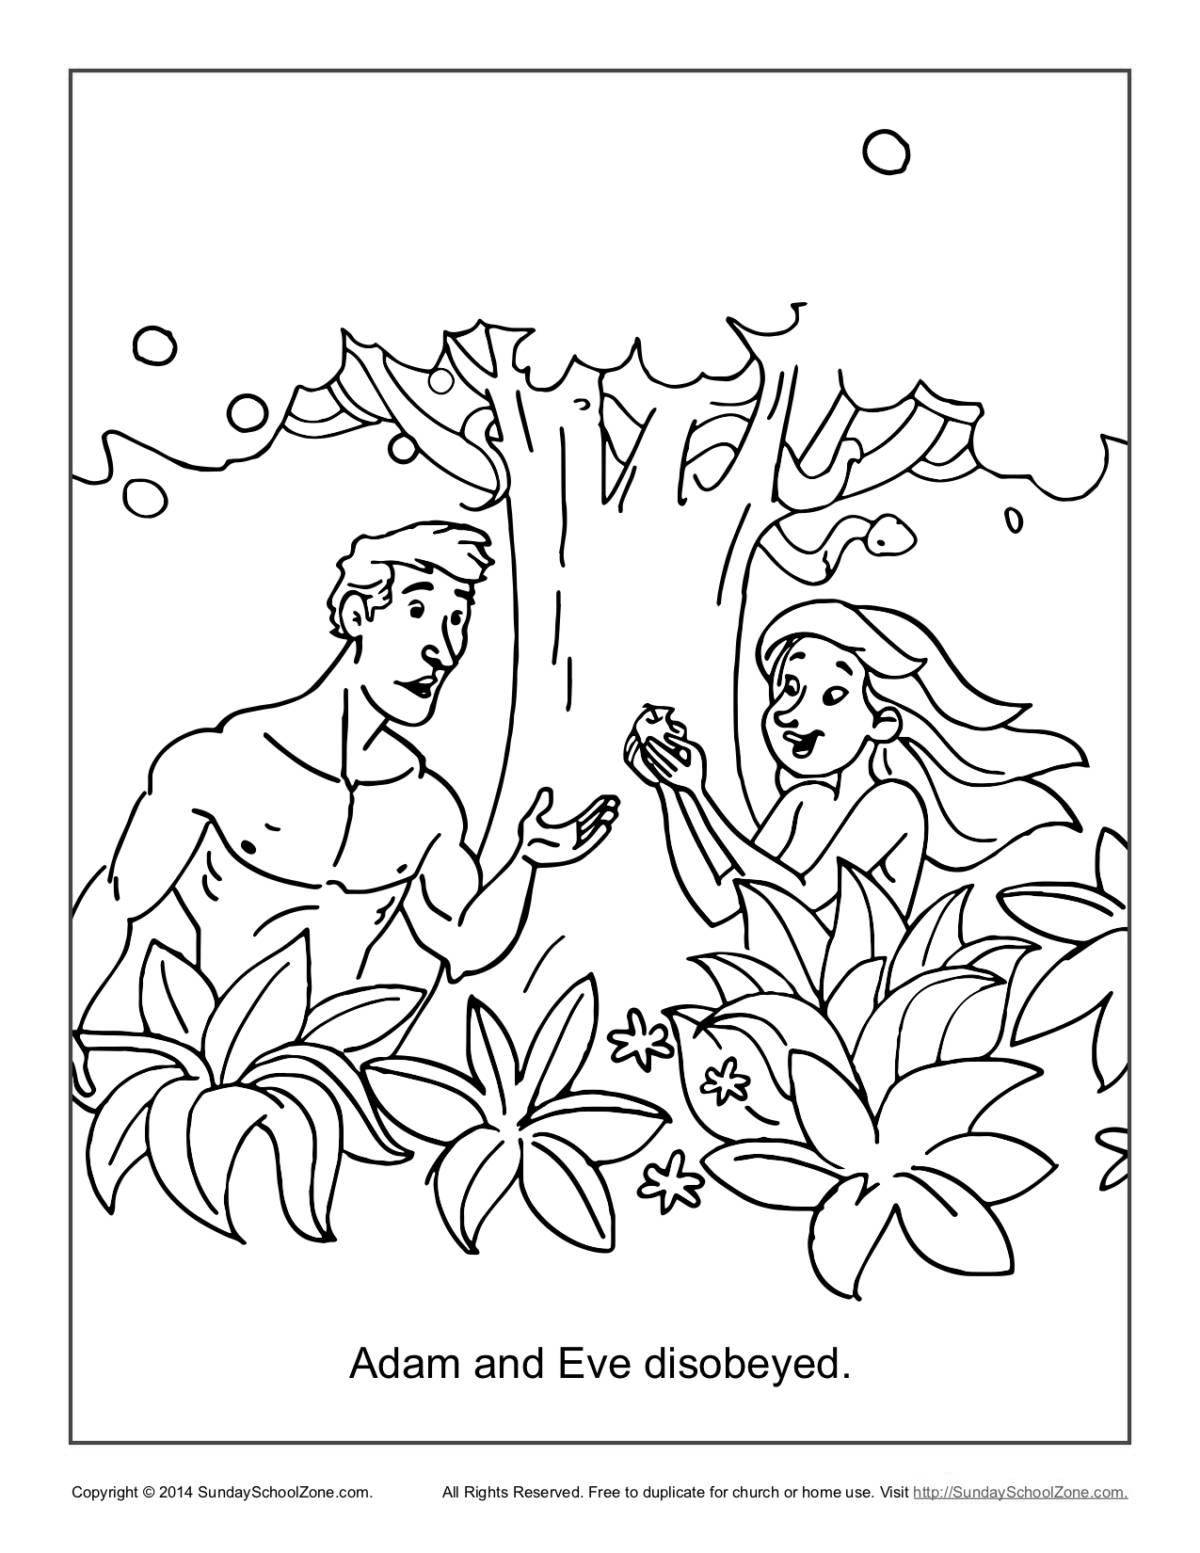 Coloring page adorable adam and eve